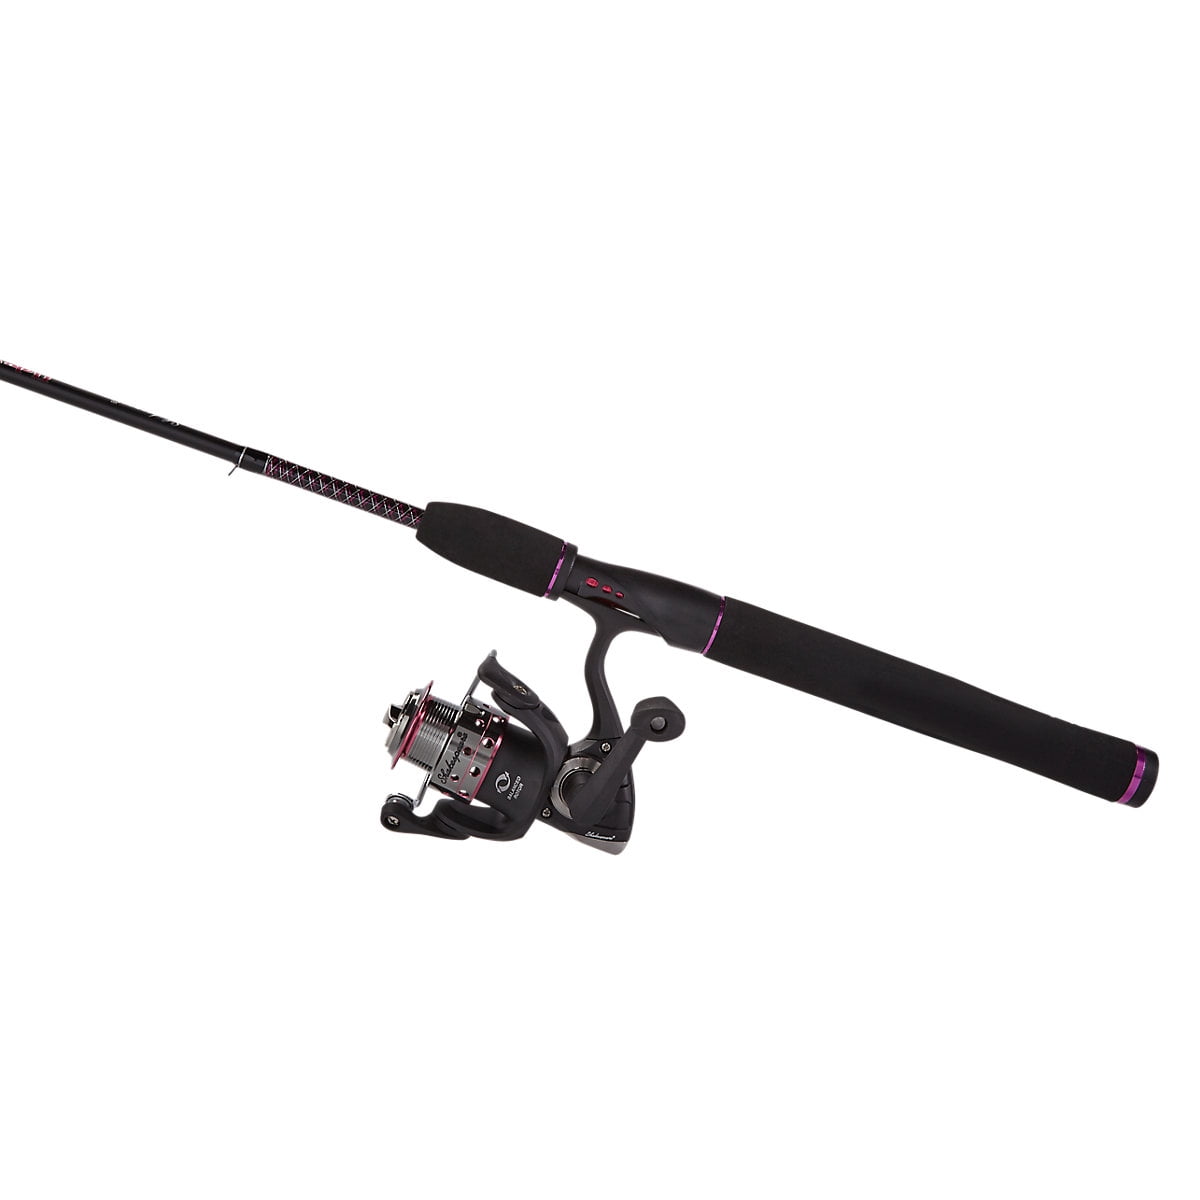 Ugly Stik - Pink for breast cancer. Pink for ladies